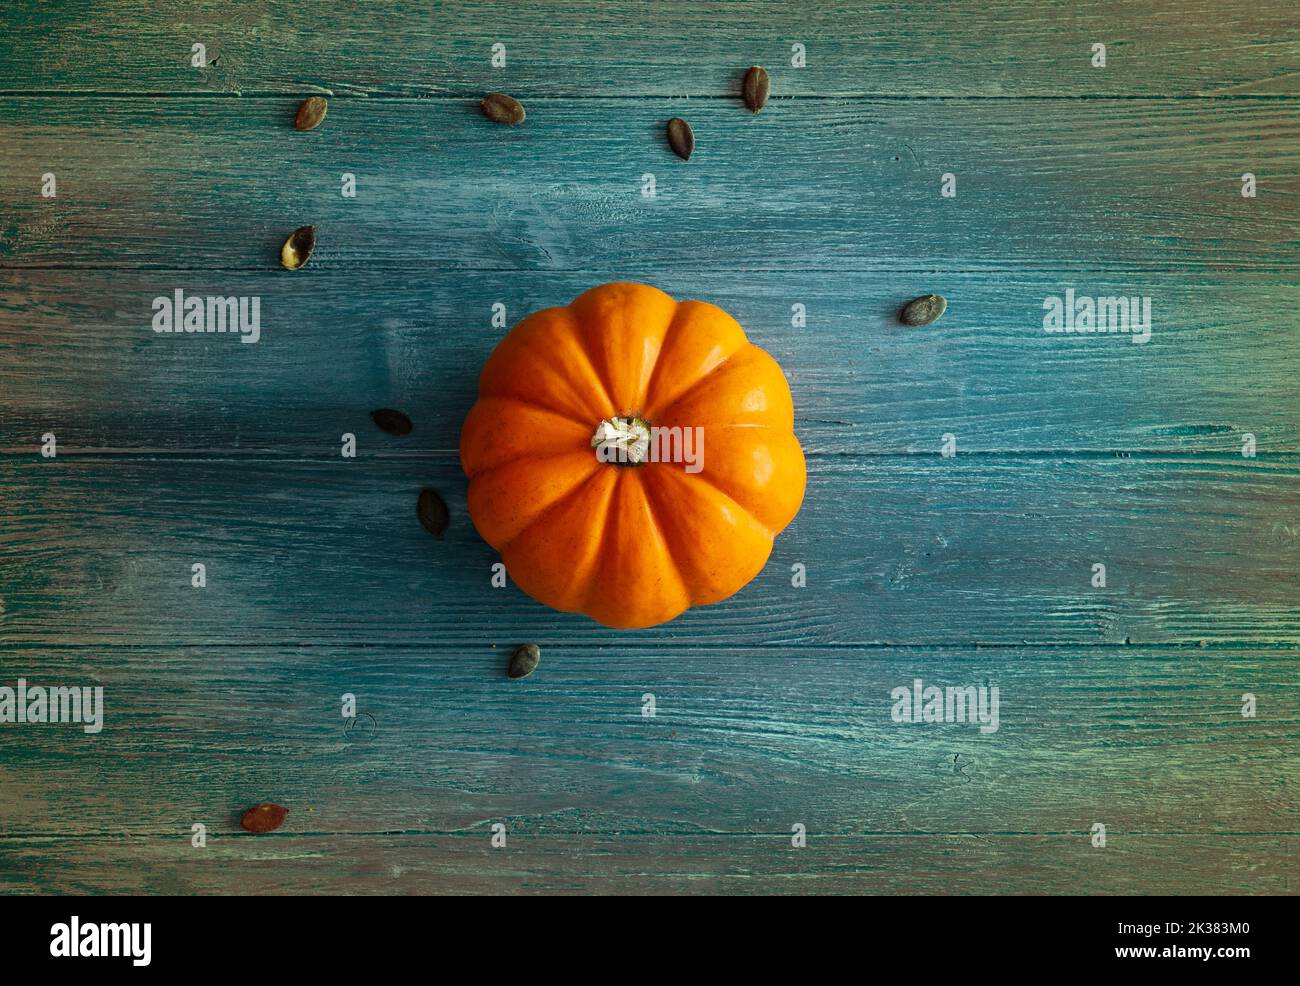 orange pumpkin on blue and colorful wooden background, ideal as a background for Halloween or autumn theme, orange pumpkin isolated Stock Photo